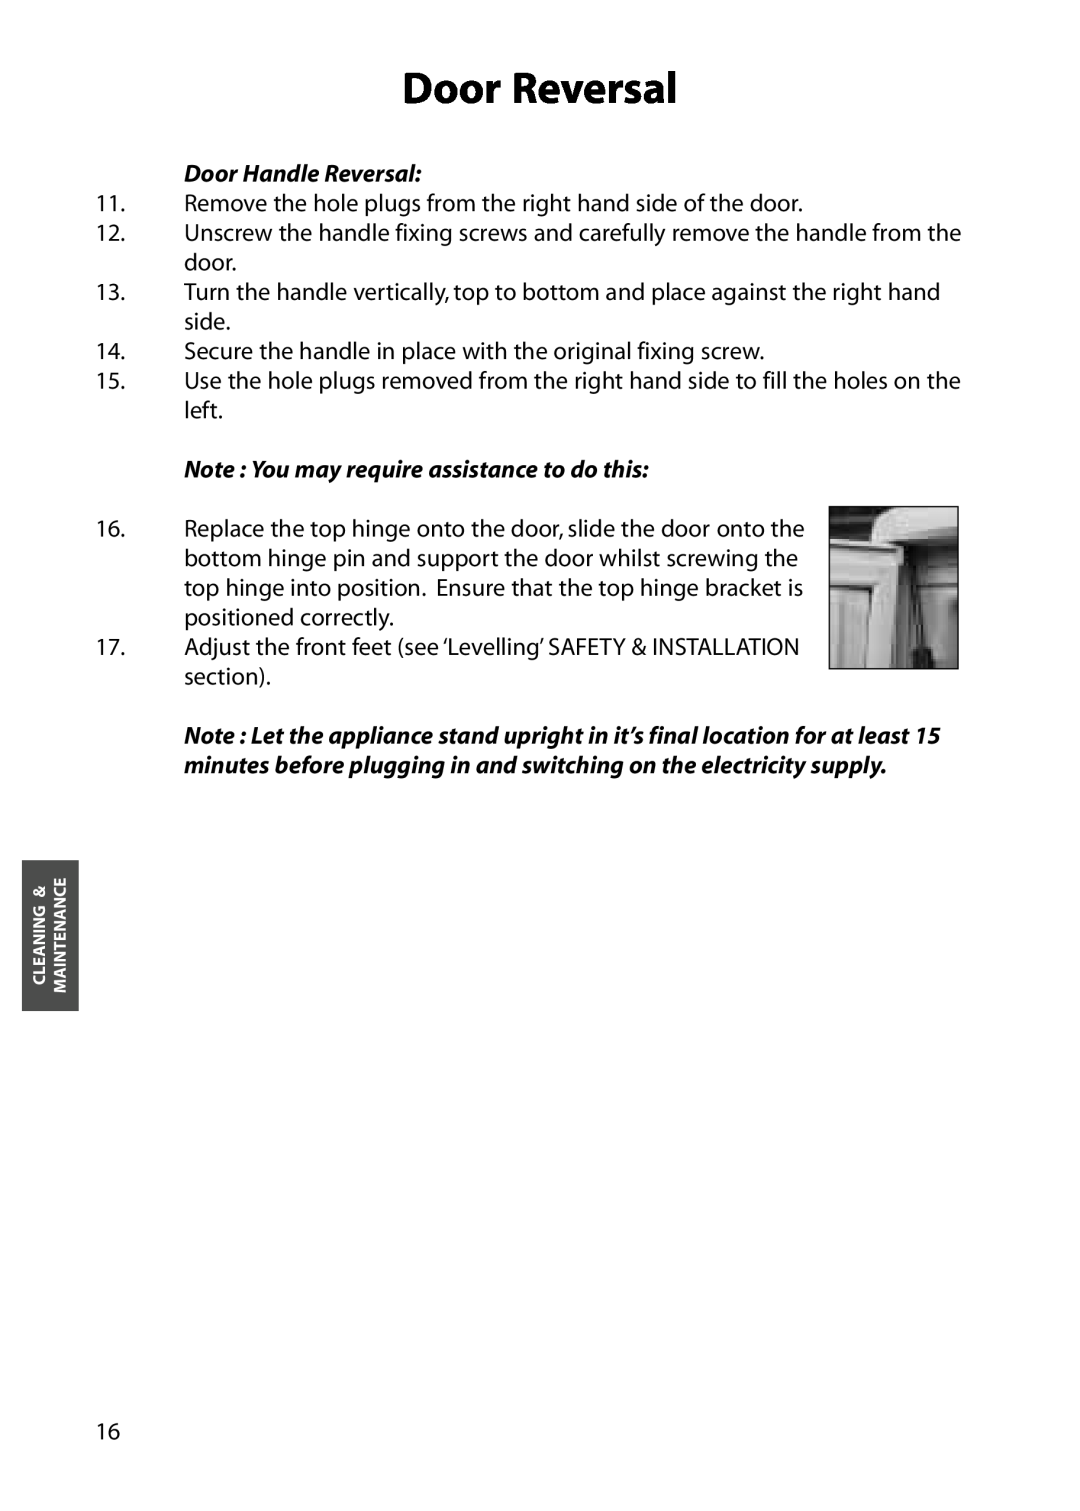 Hotpoint RLA81, RLM81 manual Door Reversal, Door Handle Reversal, Note You may require assistance to do this 